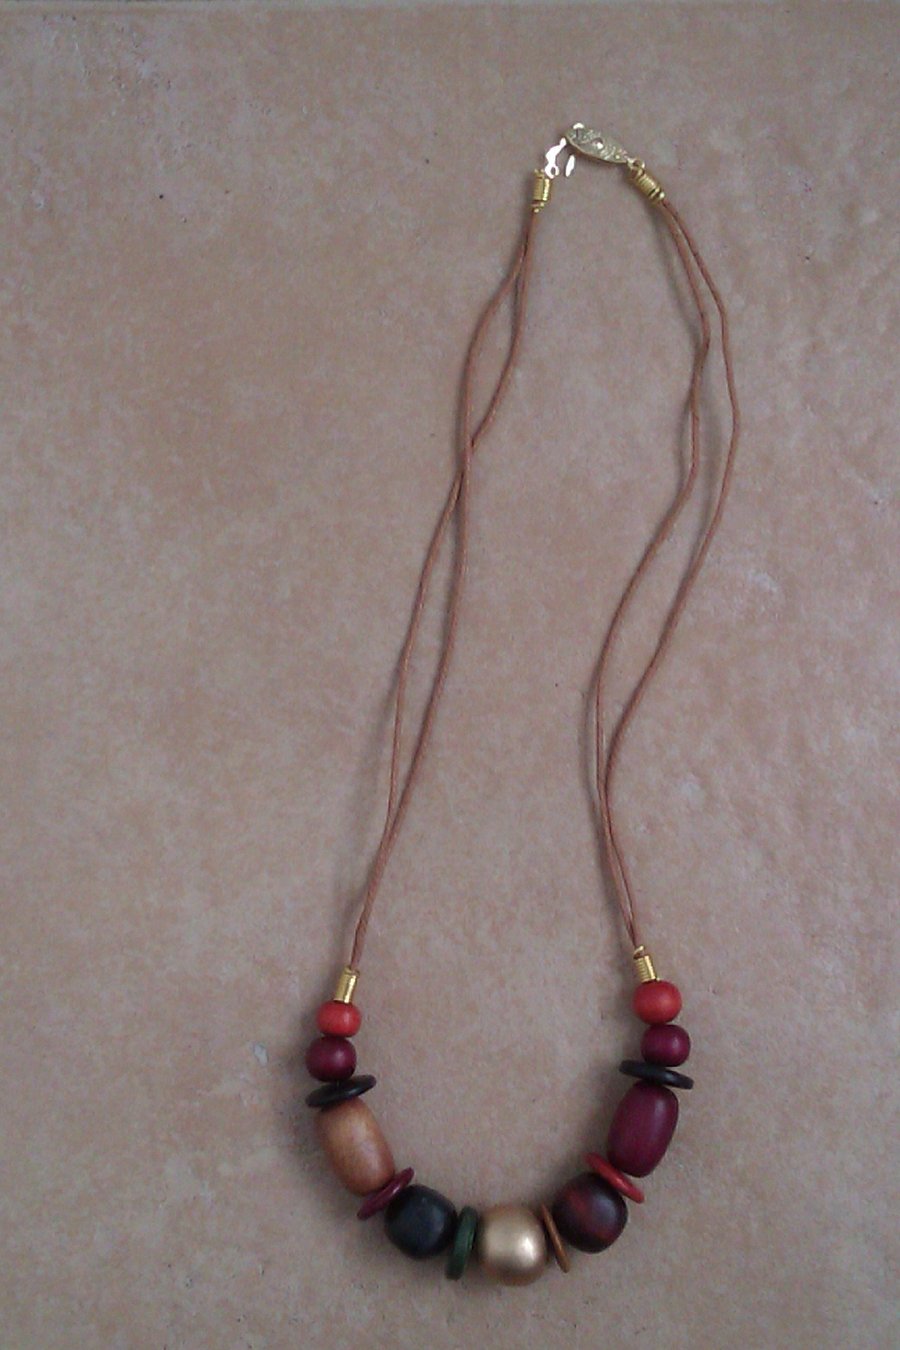 Multicoloured wooden bead necklace